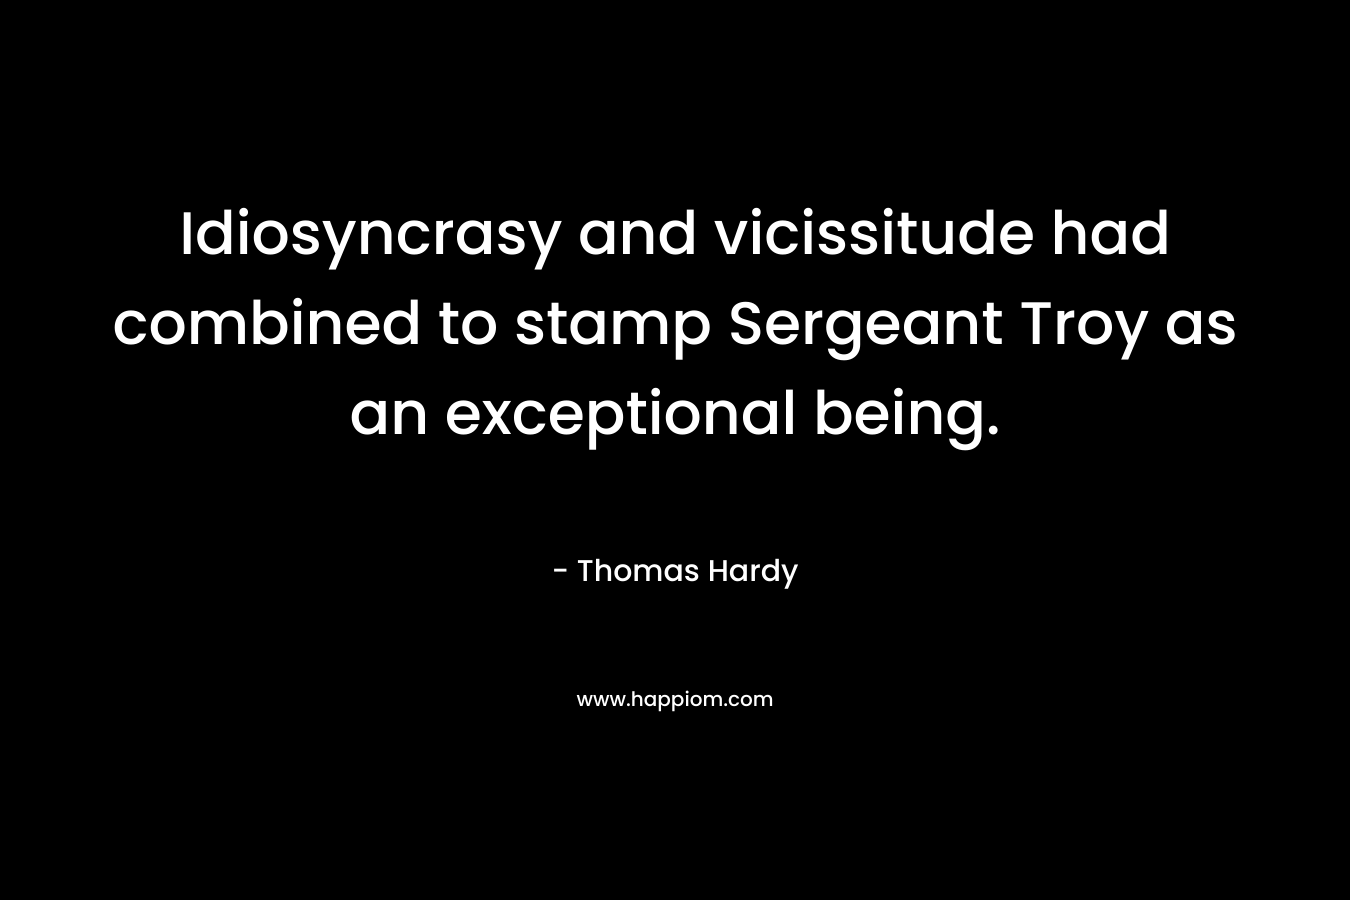 Idiosyncrasy and vicissitude had combined to stamp Sergeant Troy as an exceptional being. – Thomas Hardy